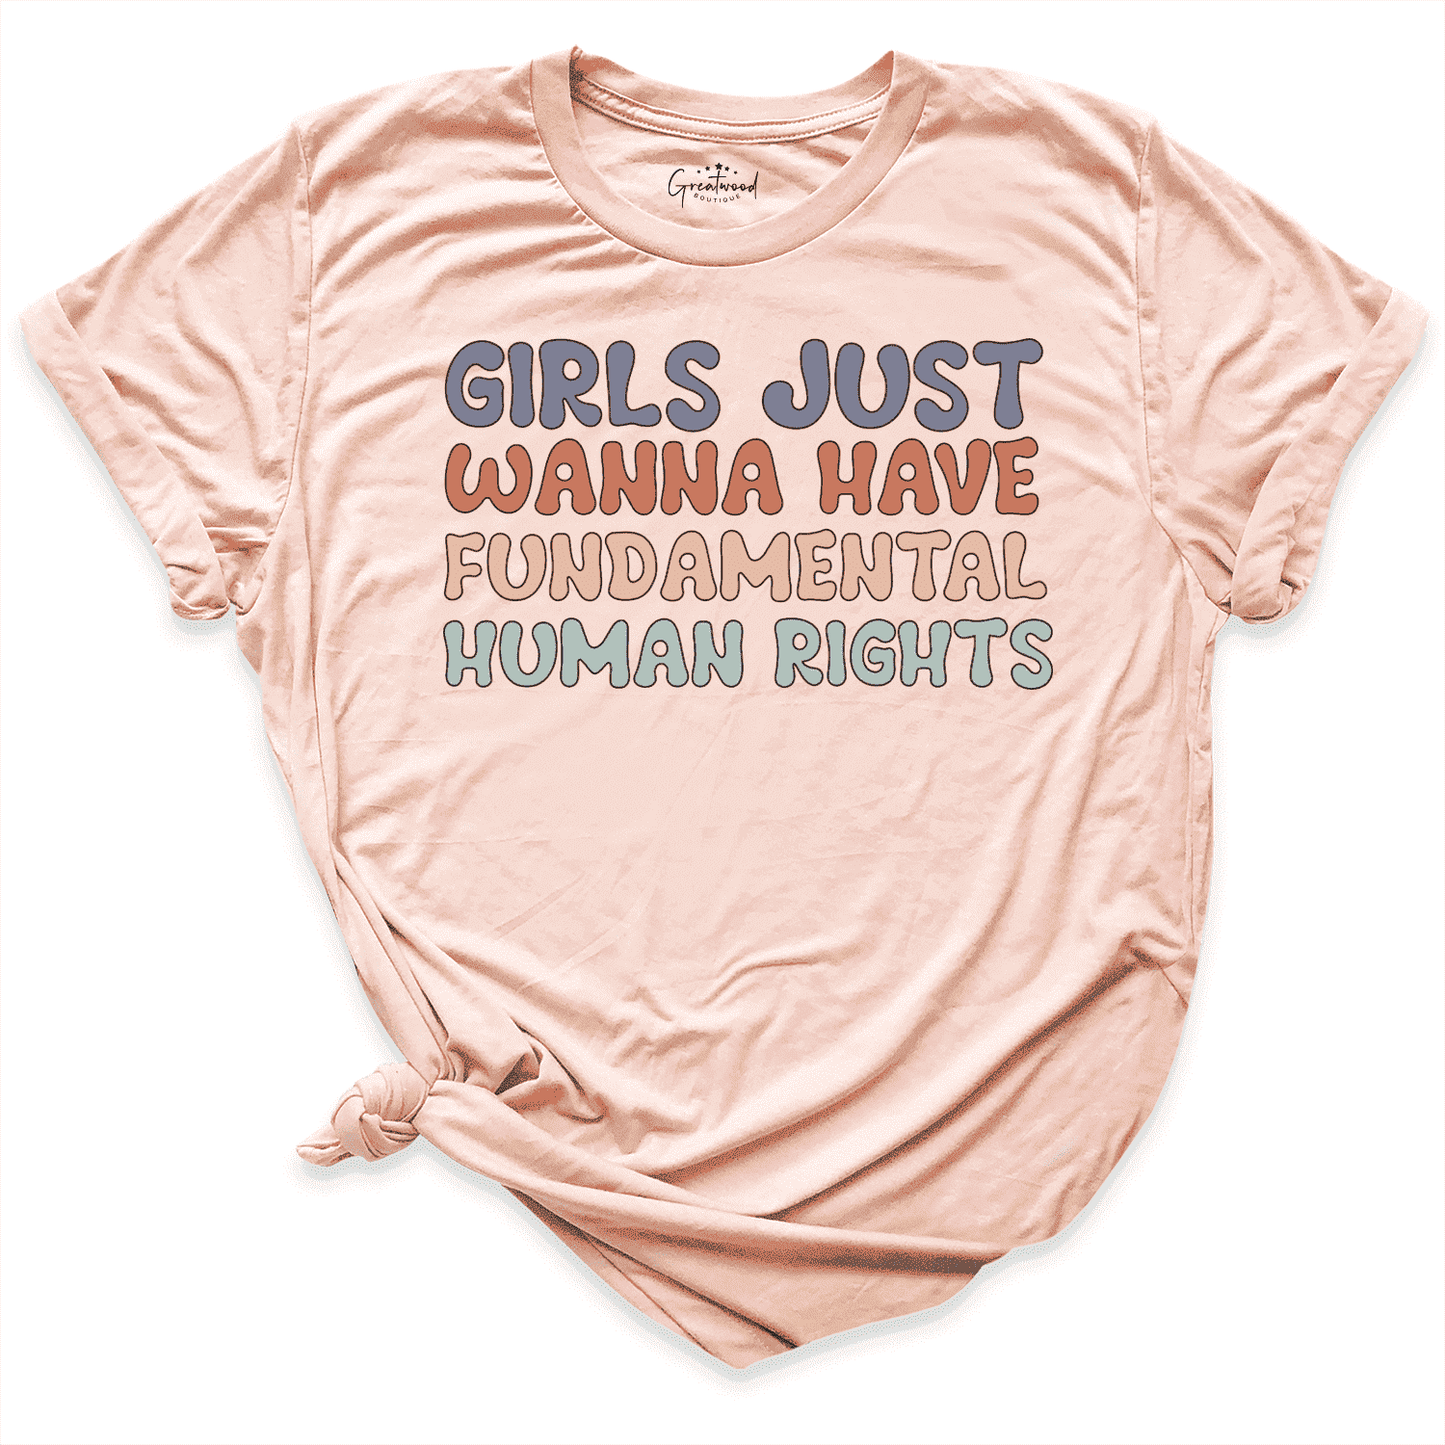 Girls Just Wanna Have Fundamental Human Rights Shirt Peach - Greatwood Boutique